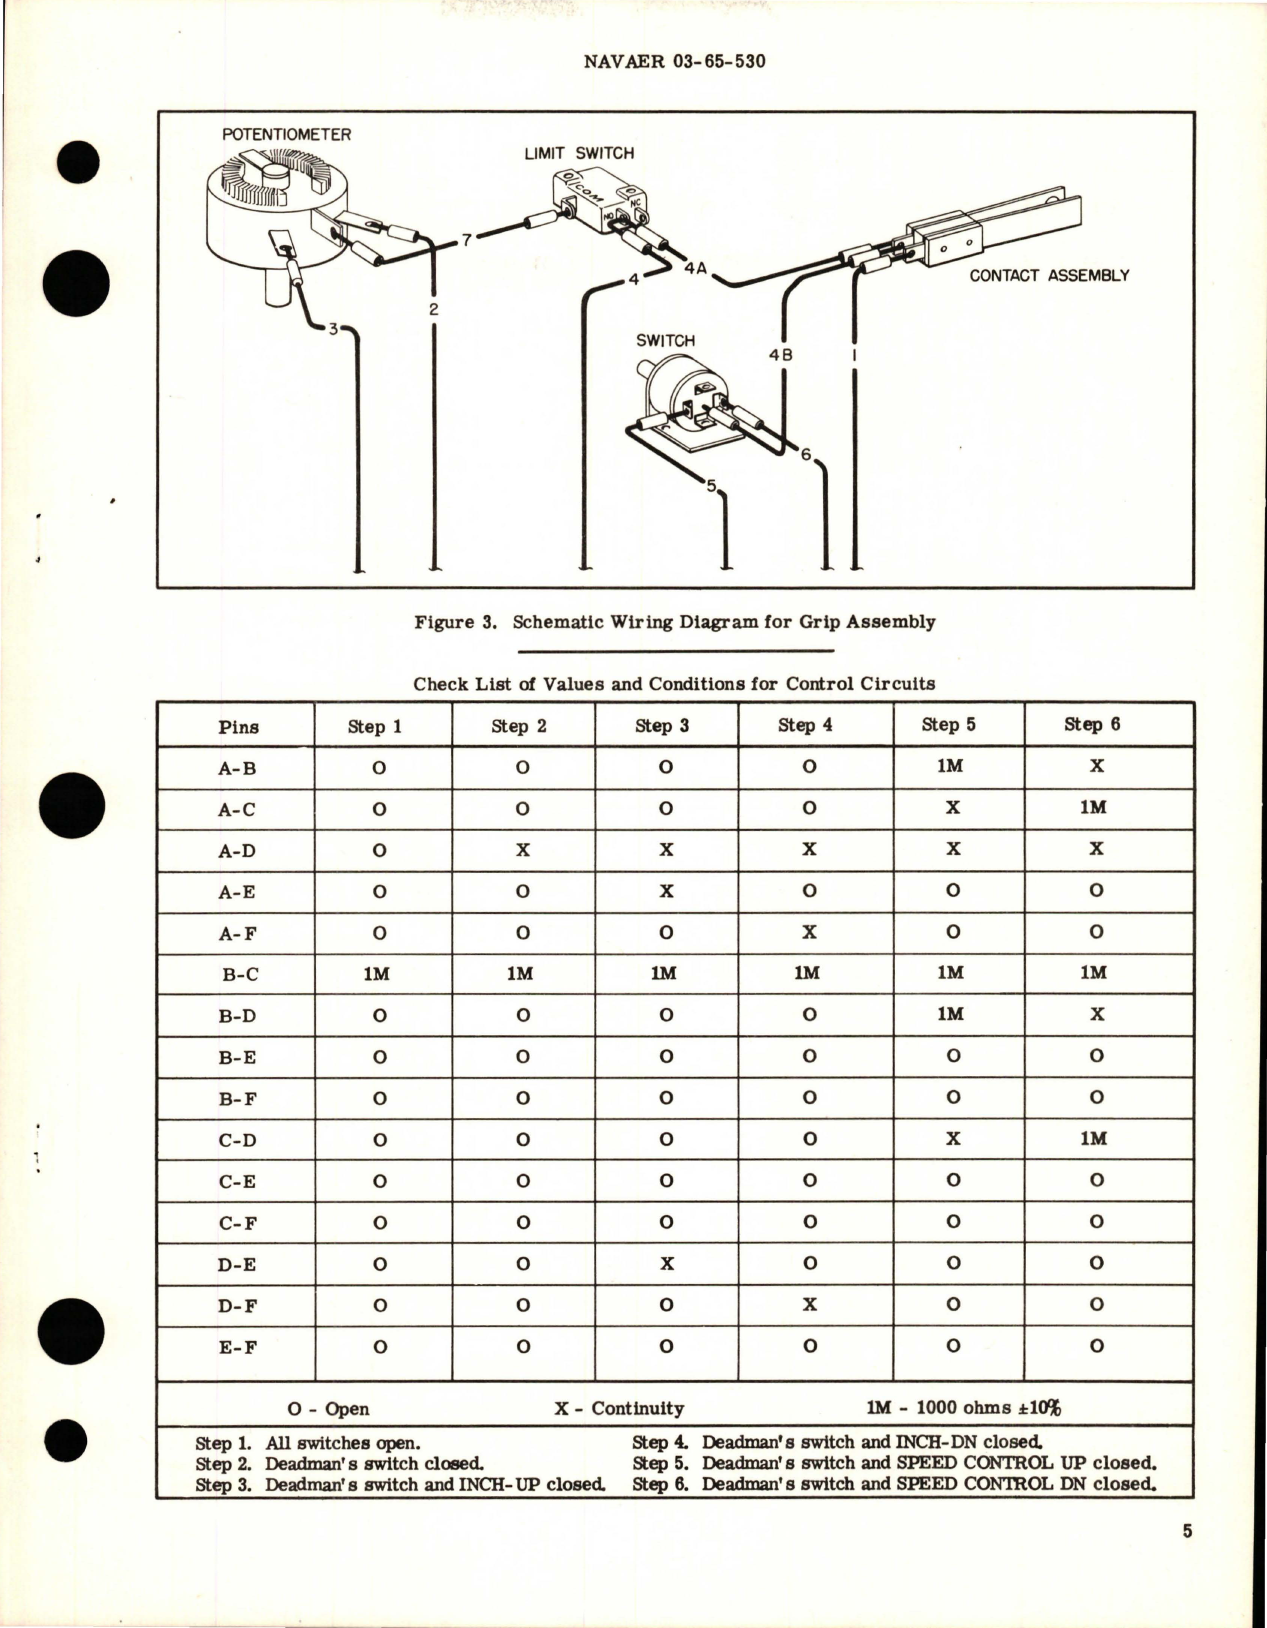 Sample page 5 from AirCorps Library document: Overhaul Instructions with Parts Breakdown for Winch Control Assembly- 079-8961